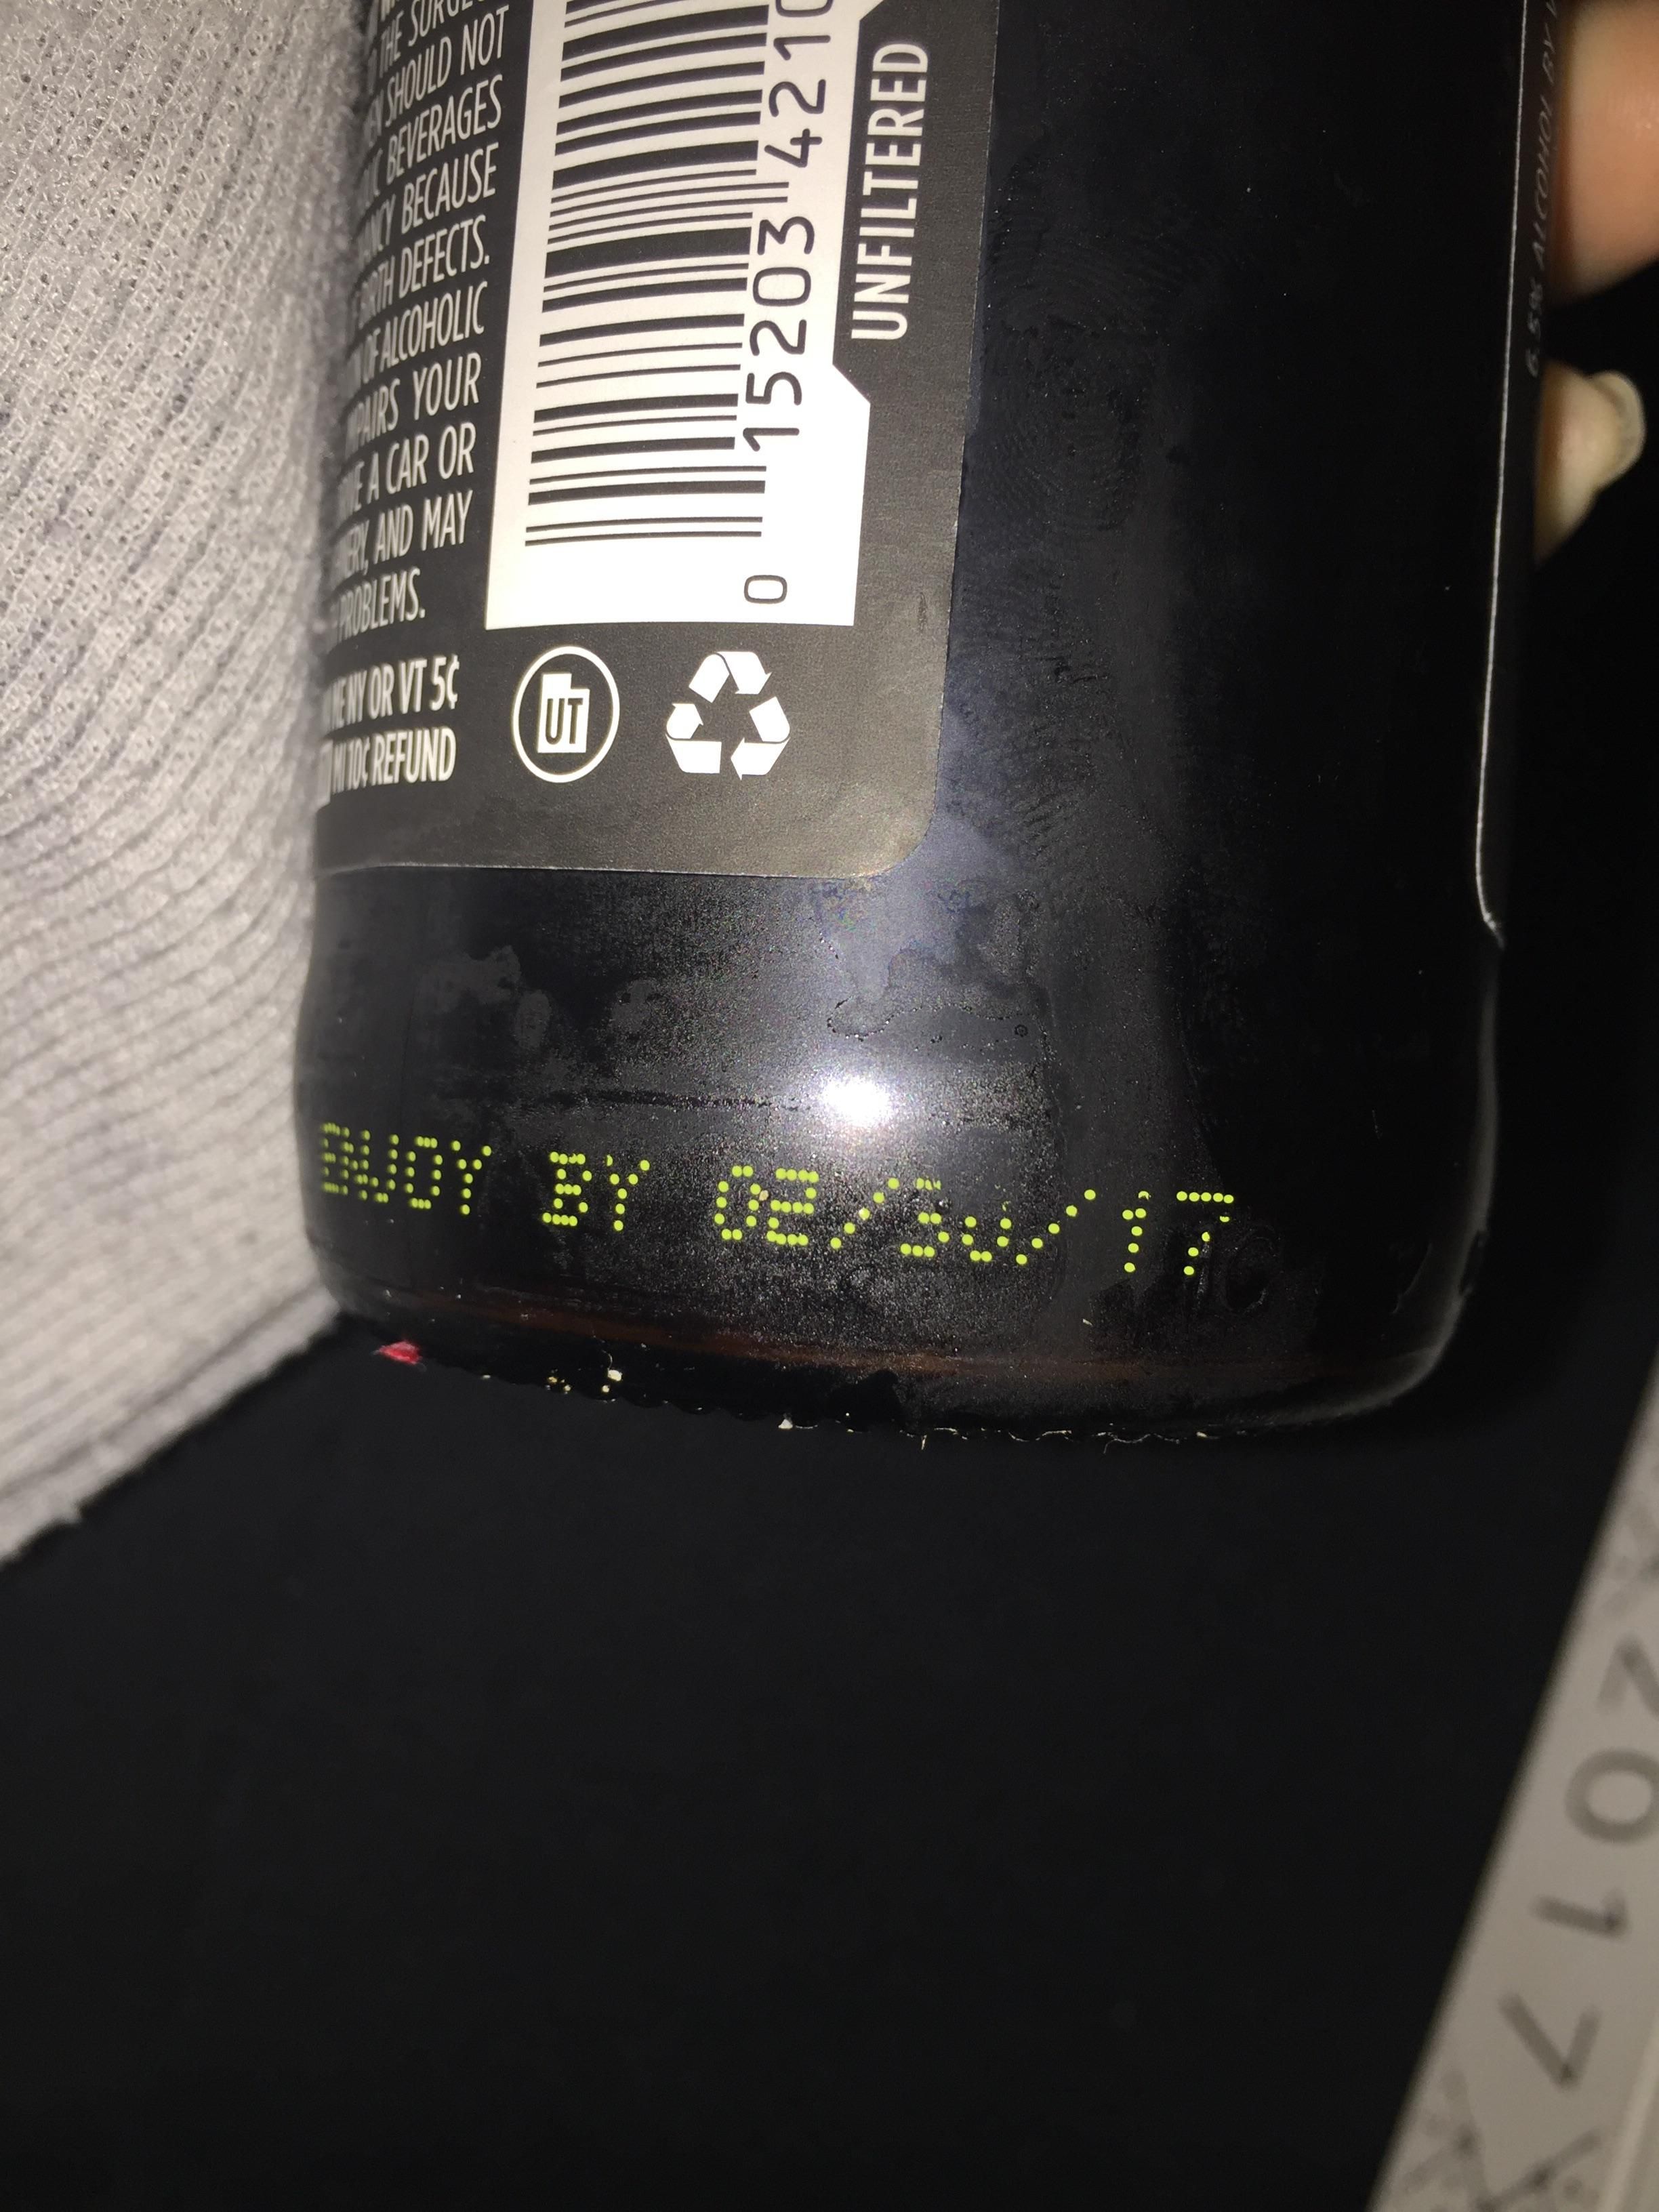 This beer expires on 2/30/17